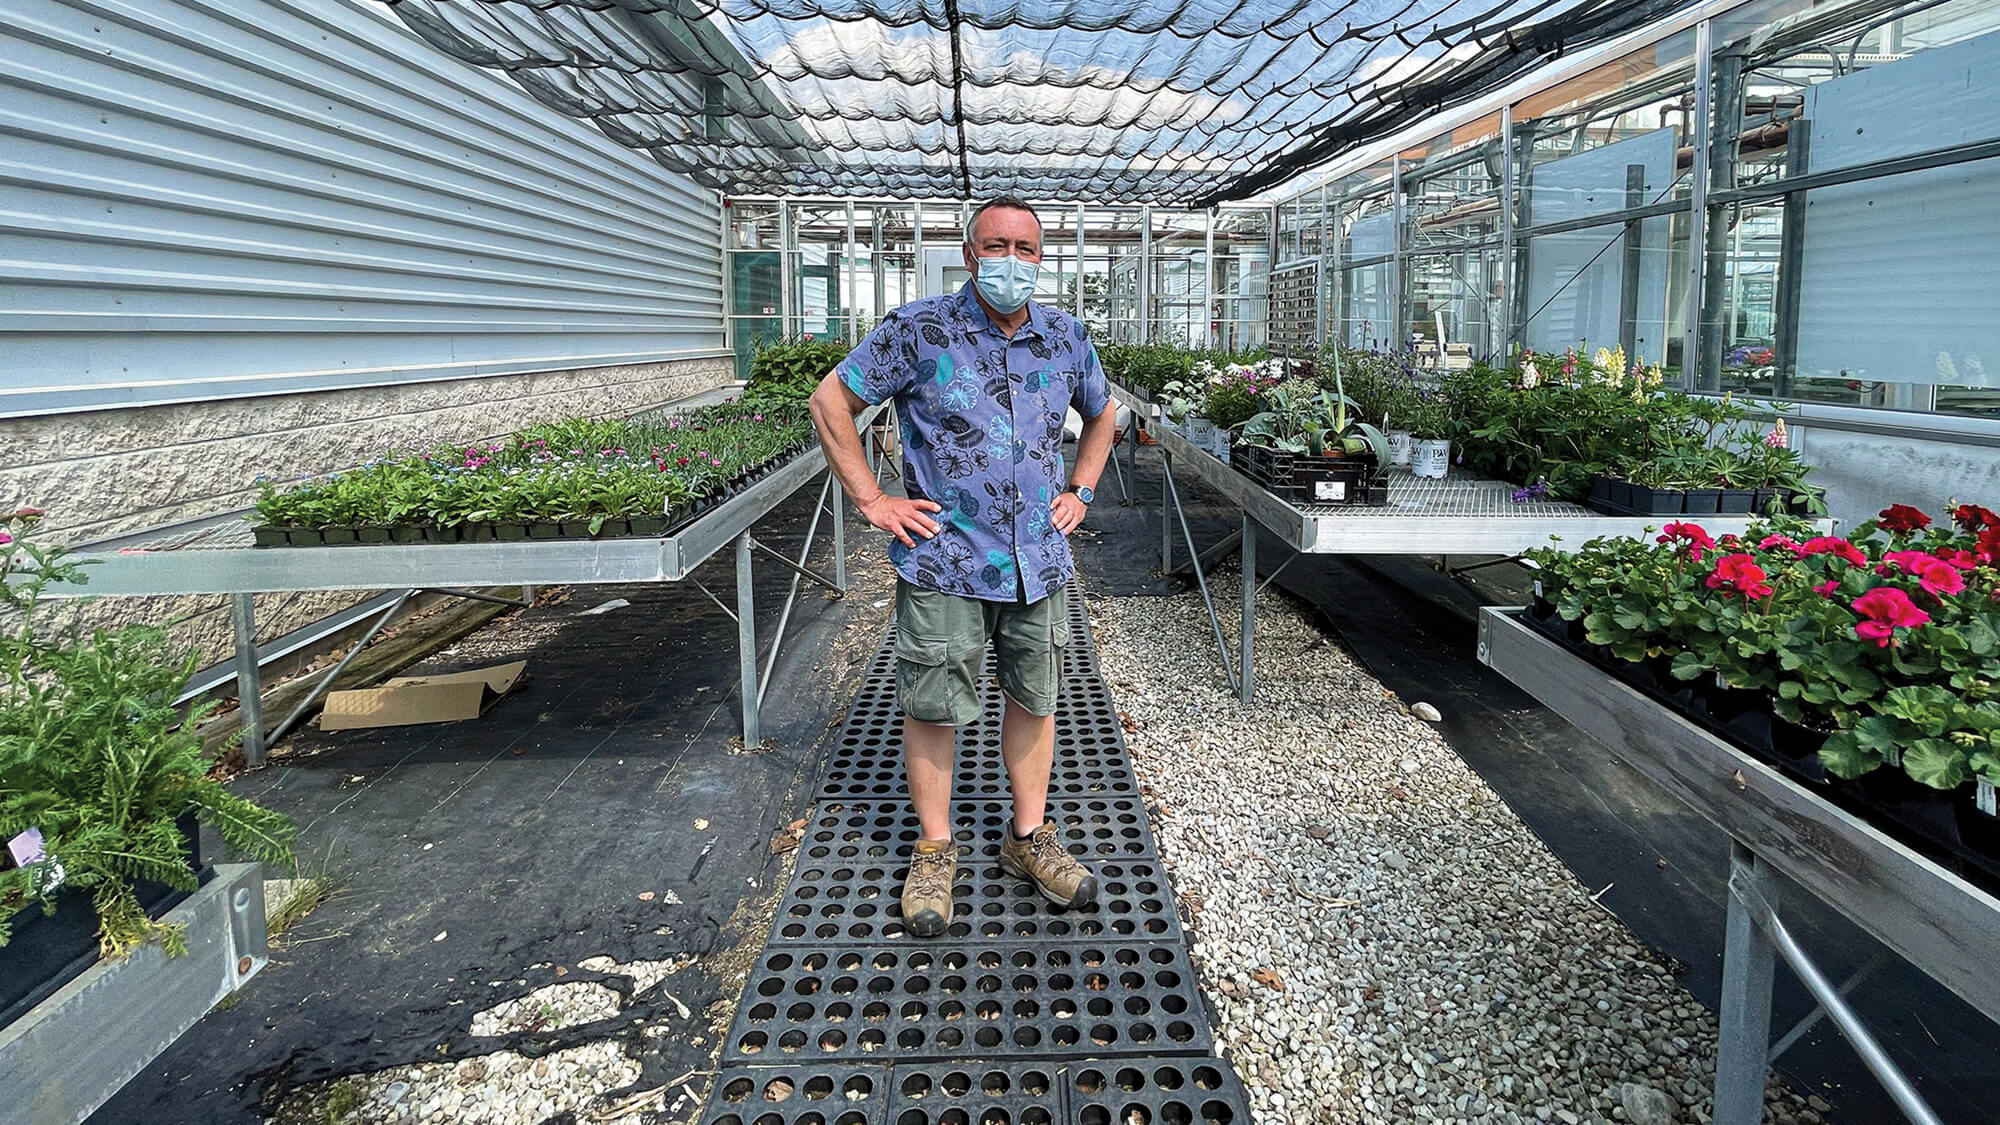 man standing in a greenhouse full of plants